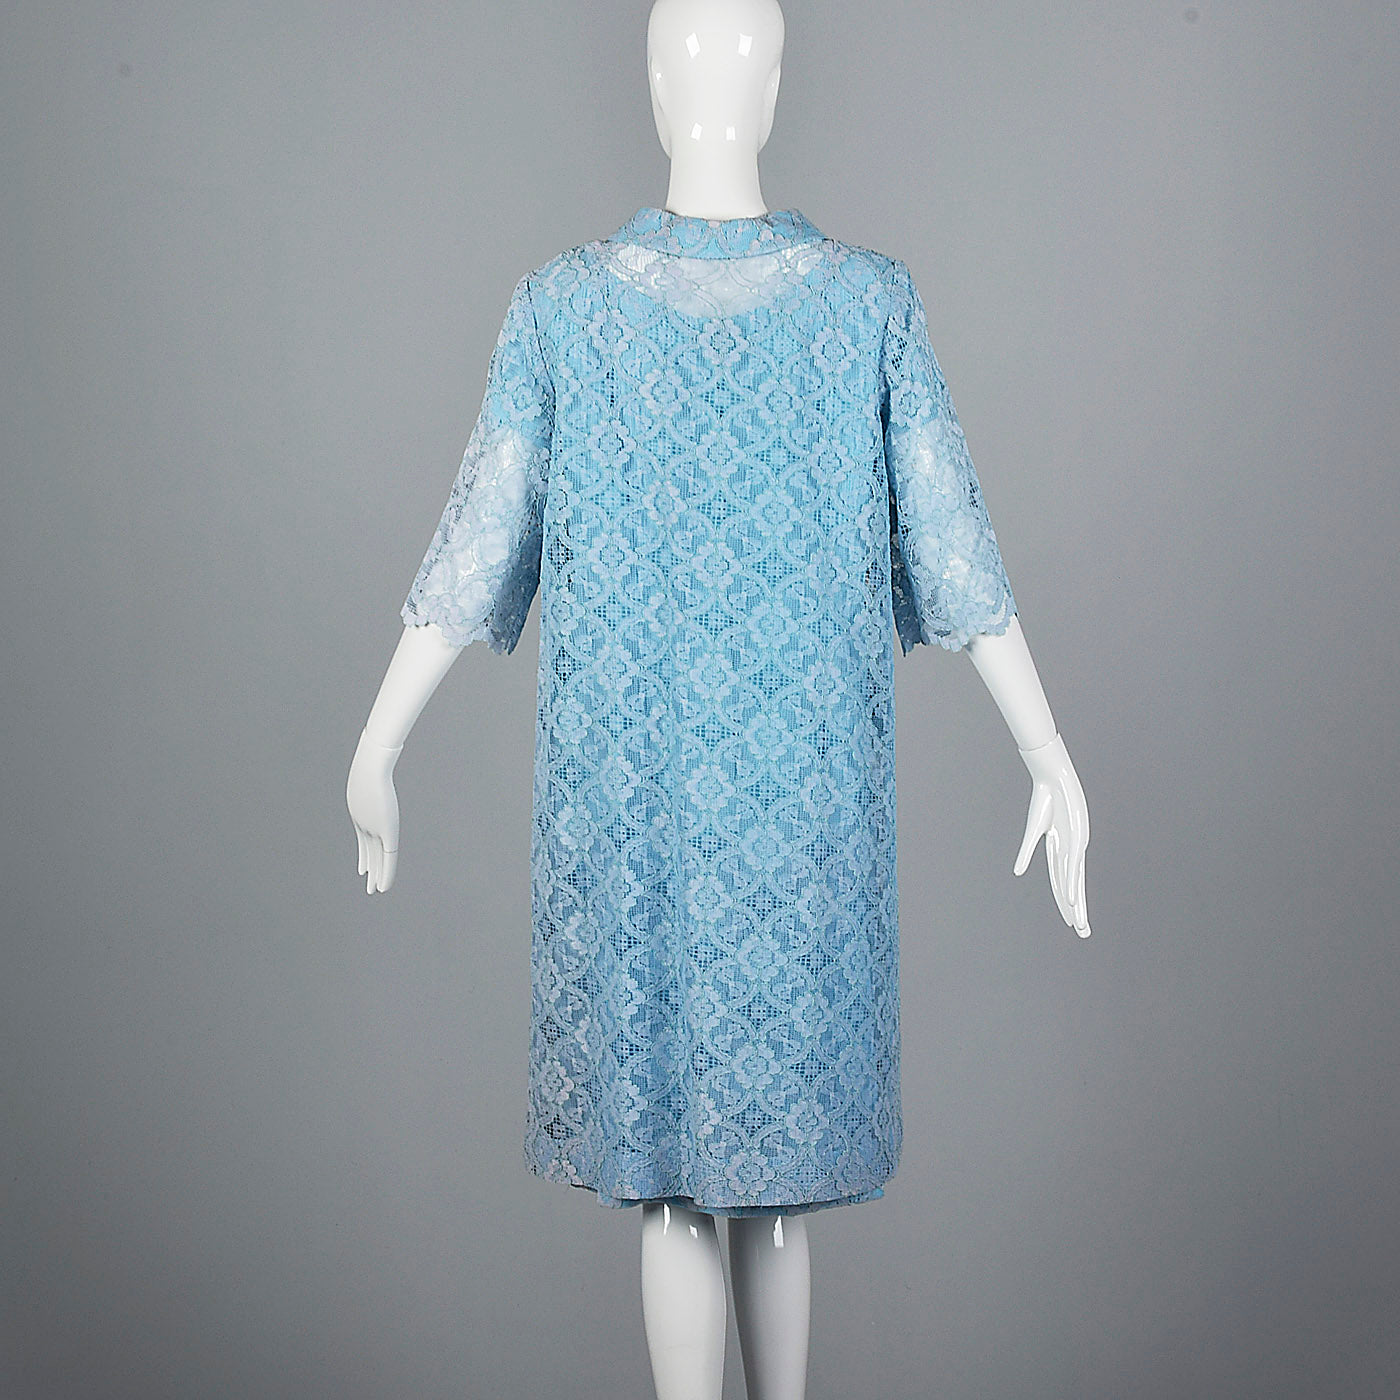 1960s Baby Blue Two Piece Set with Lace Trim